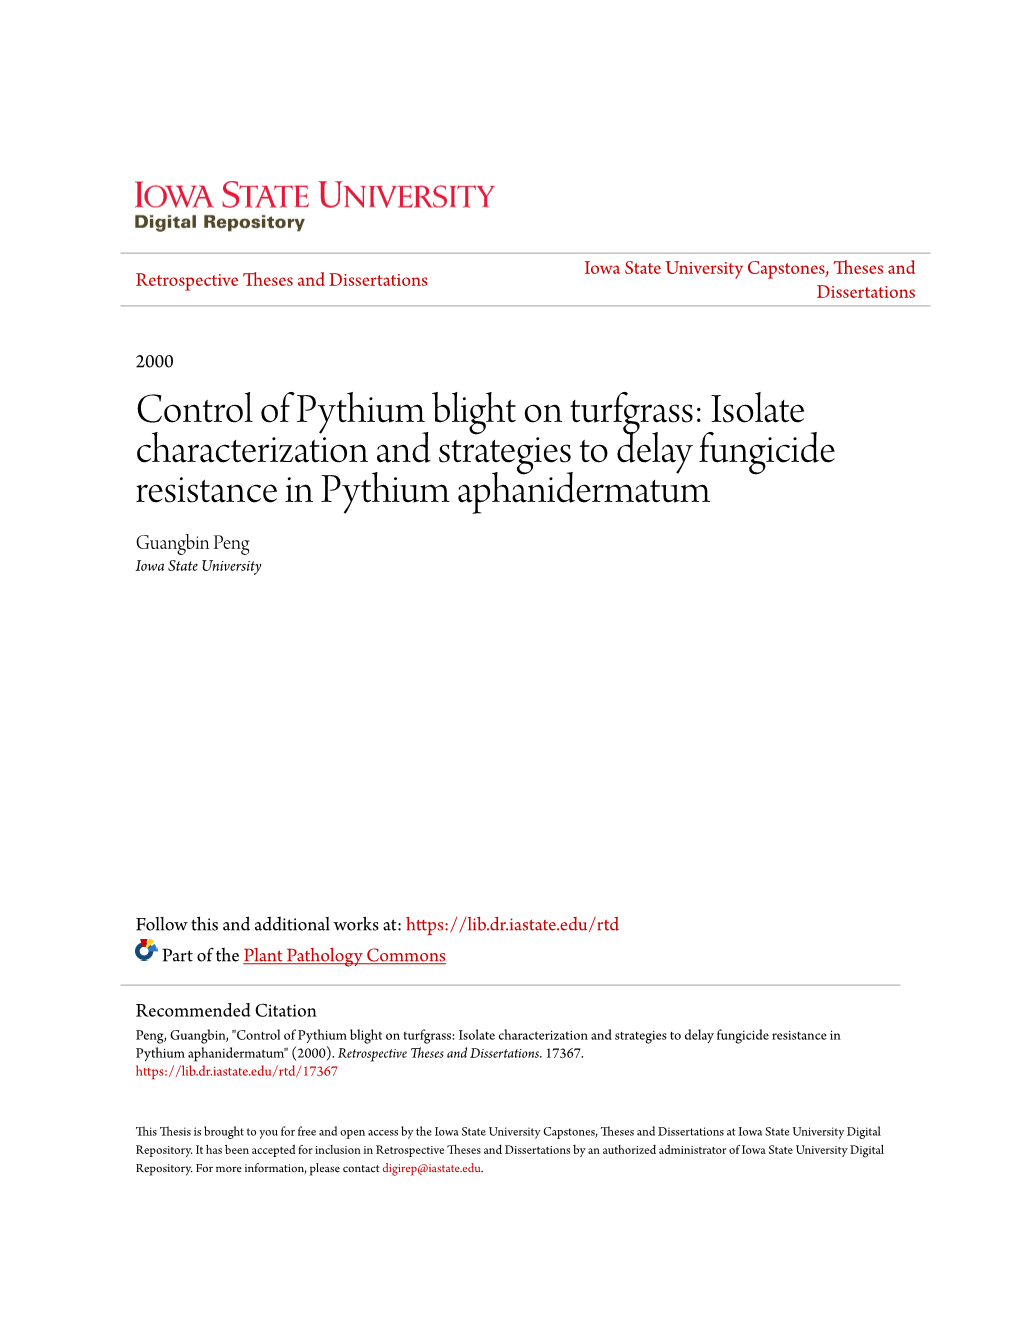 Control of Pythium Blight on Turfgrass: Isolate Characterization And